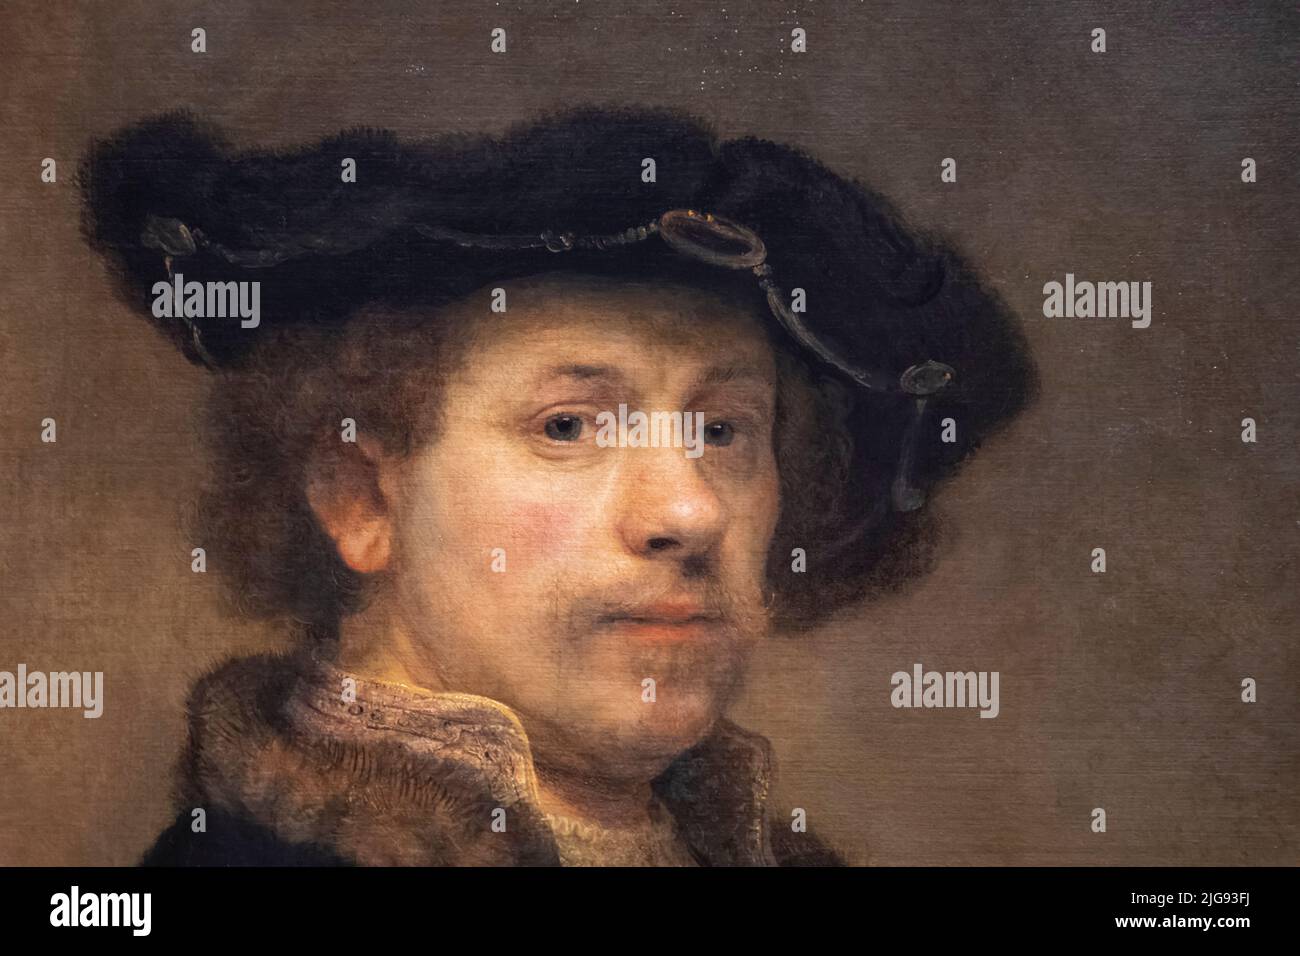 Painting titled 'Self Portrait at the Age of 34' by Dutch Artist Rembrandt dated 1640 Stock Photo